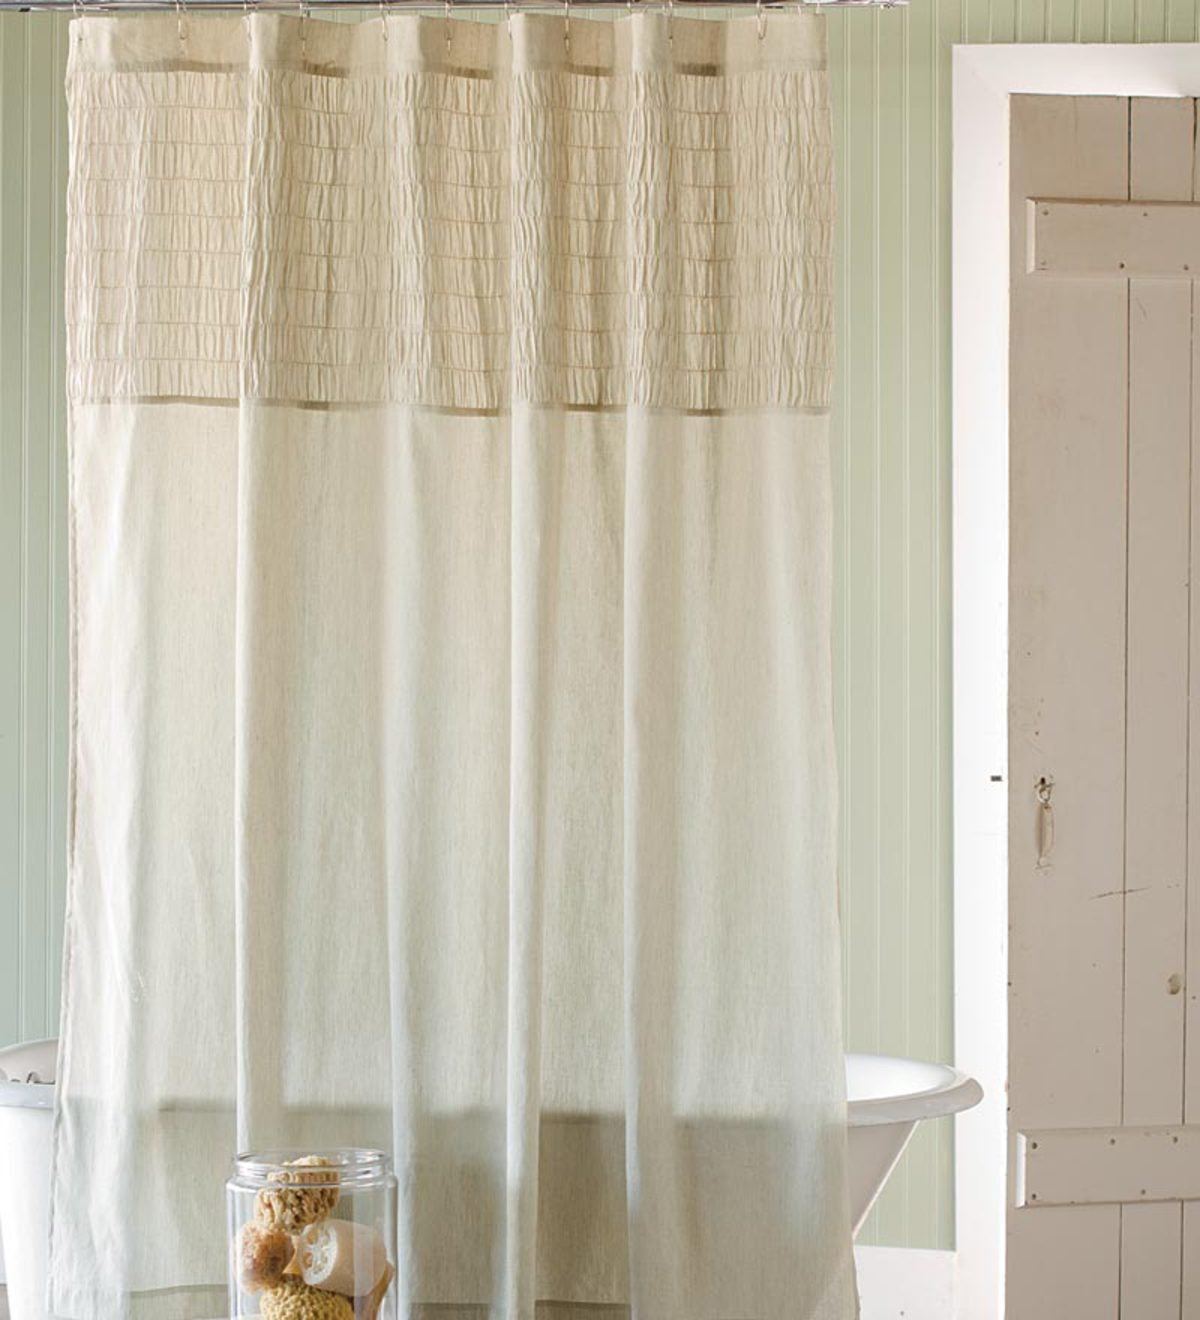 Ruched Linen Shower Curtain Plowhearth, Sheer Top Fabric Shower Curtain